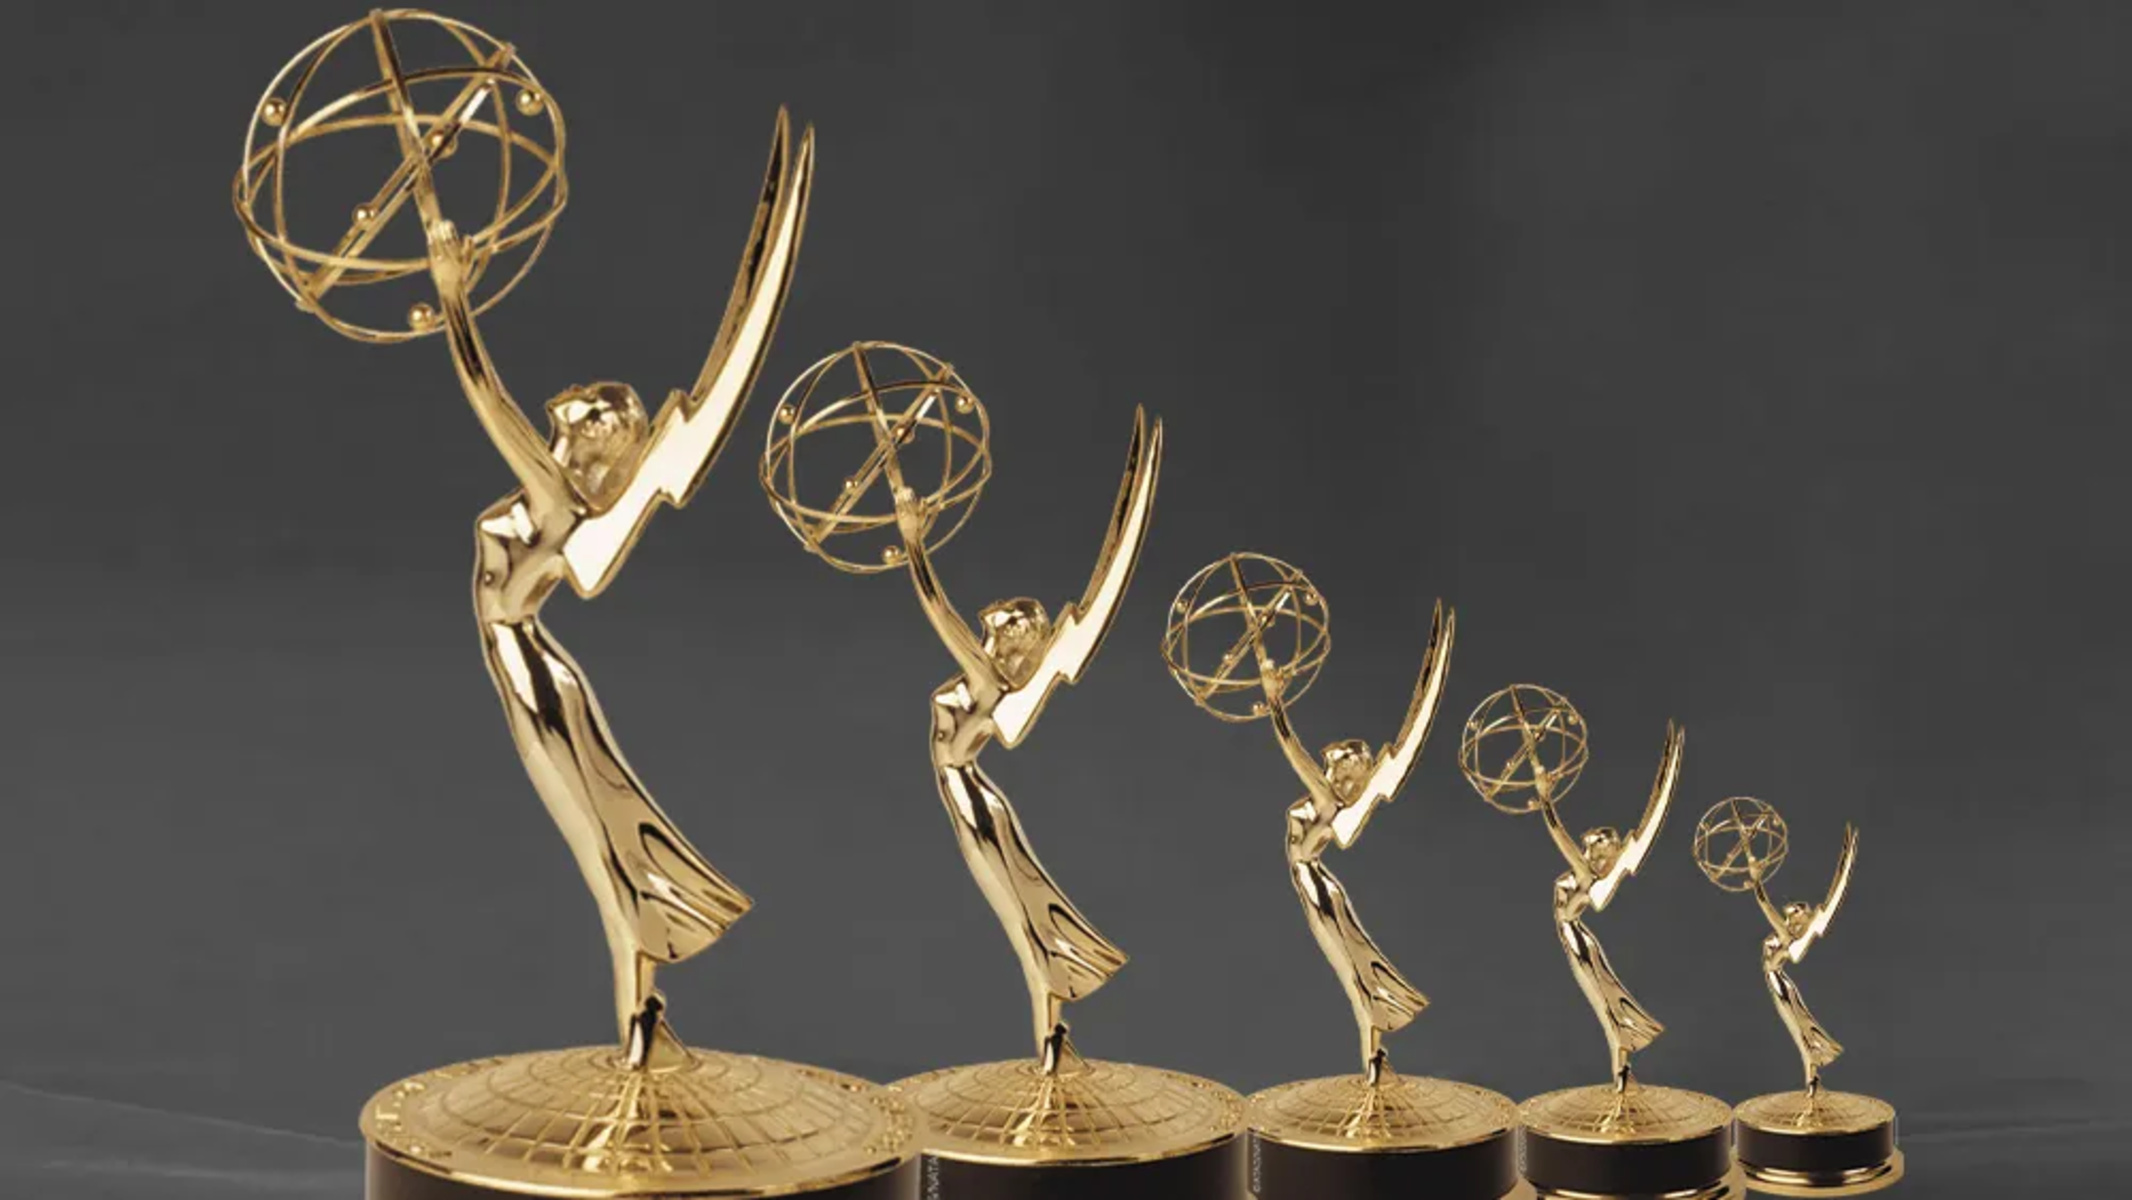 How To Watch The Emmys 2021